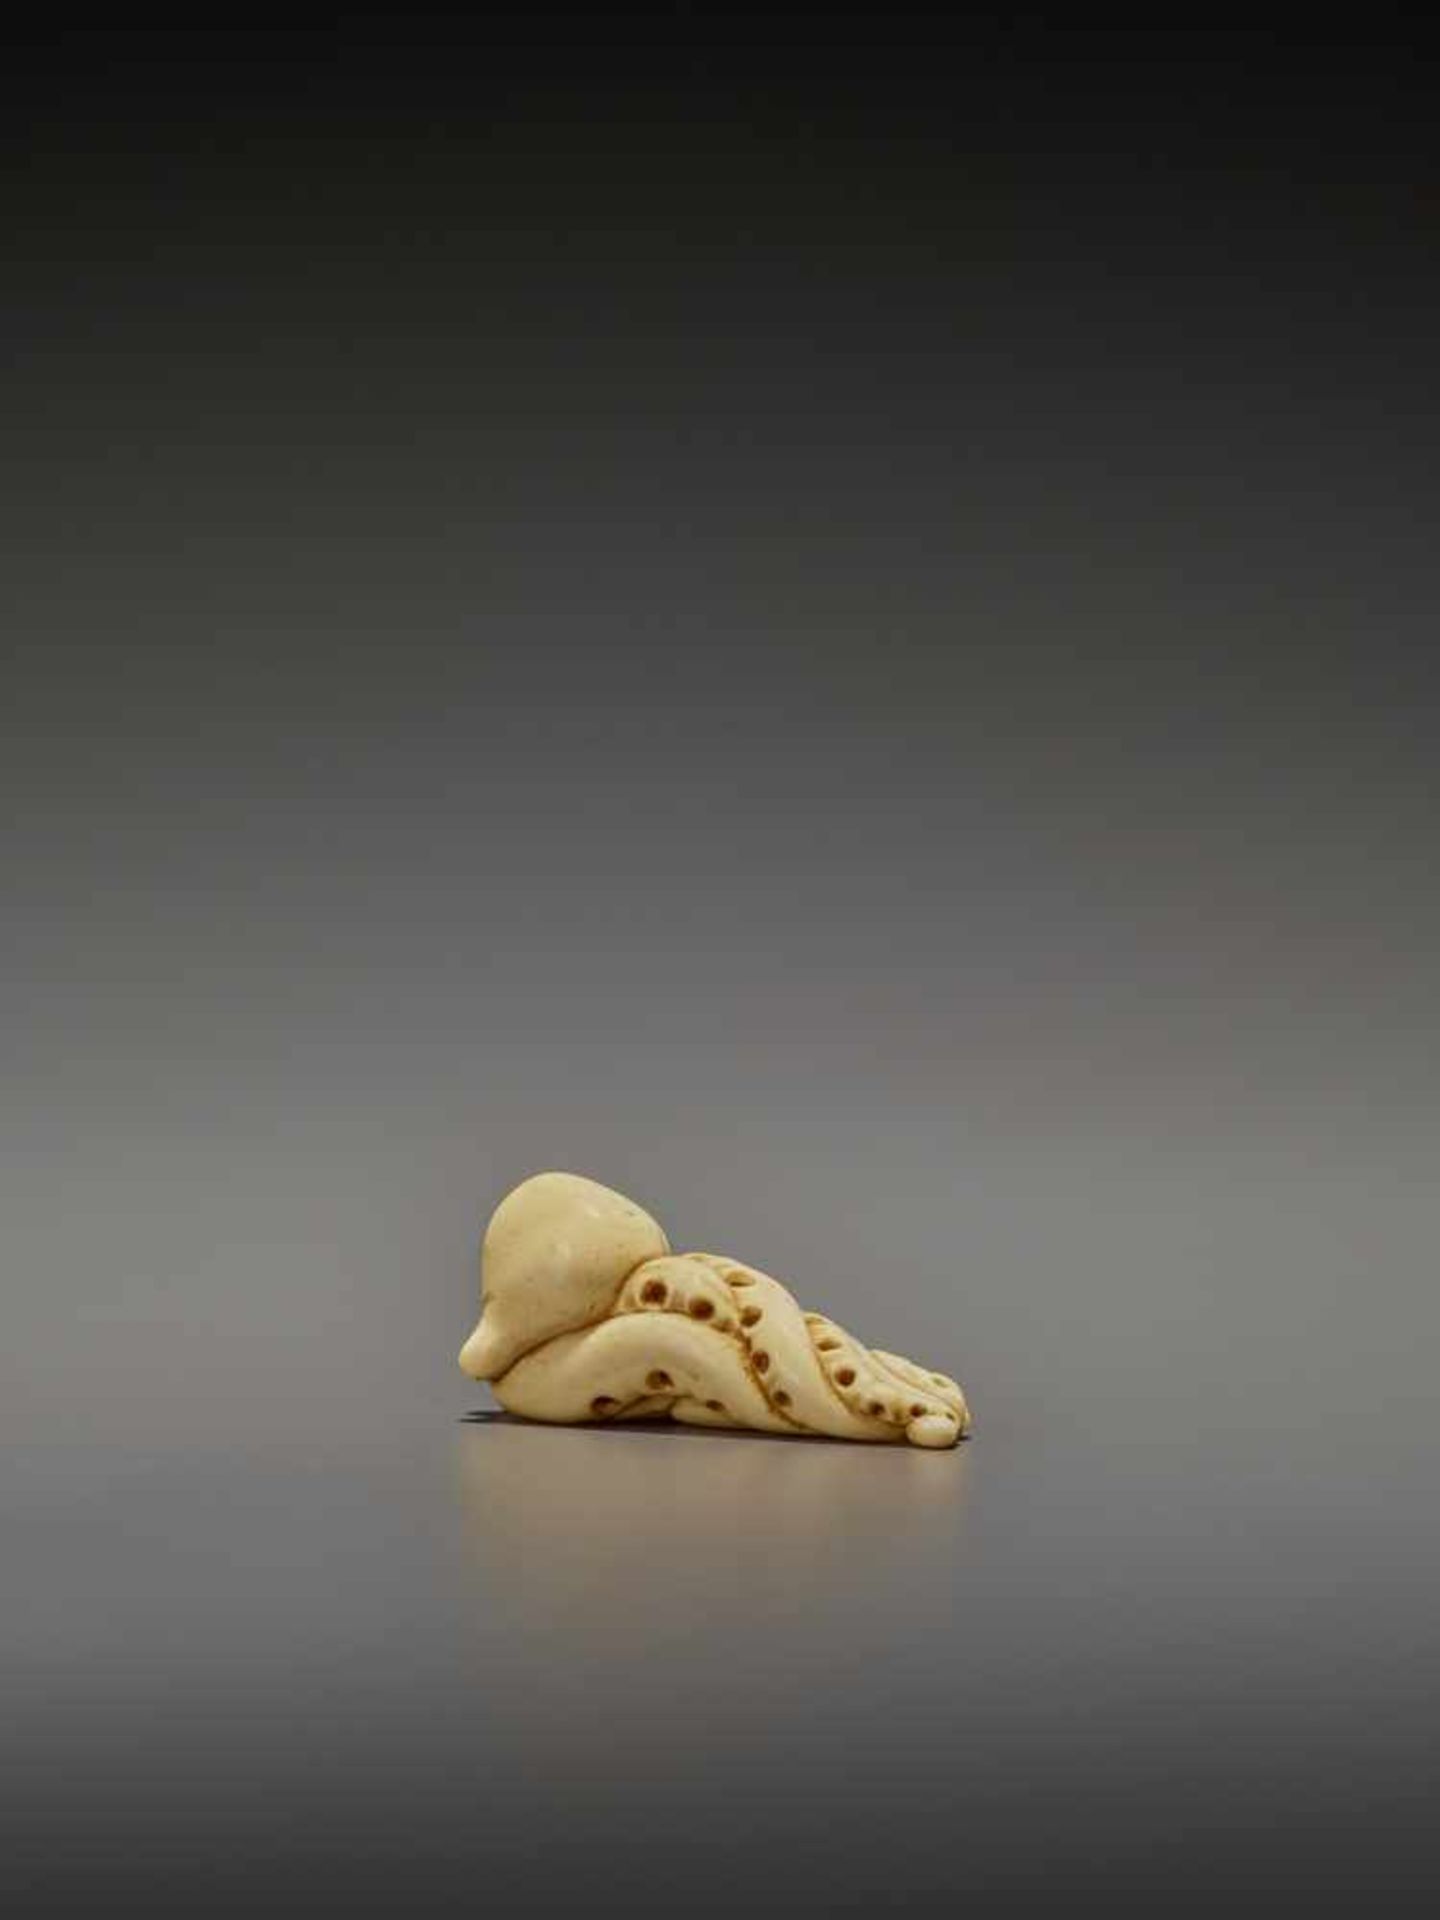 A RARE IVORY NETSUKE OF AN OCTOPUS UnsignedJapan, early 19th century, Edo period (1615-1868)The - Image 6 of 11